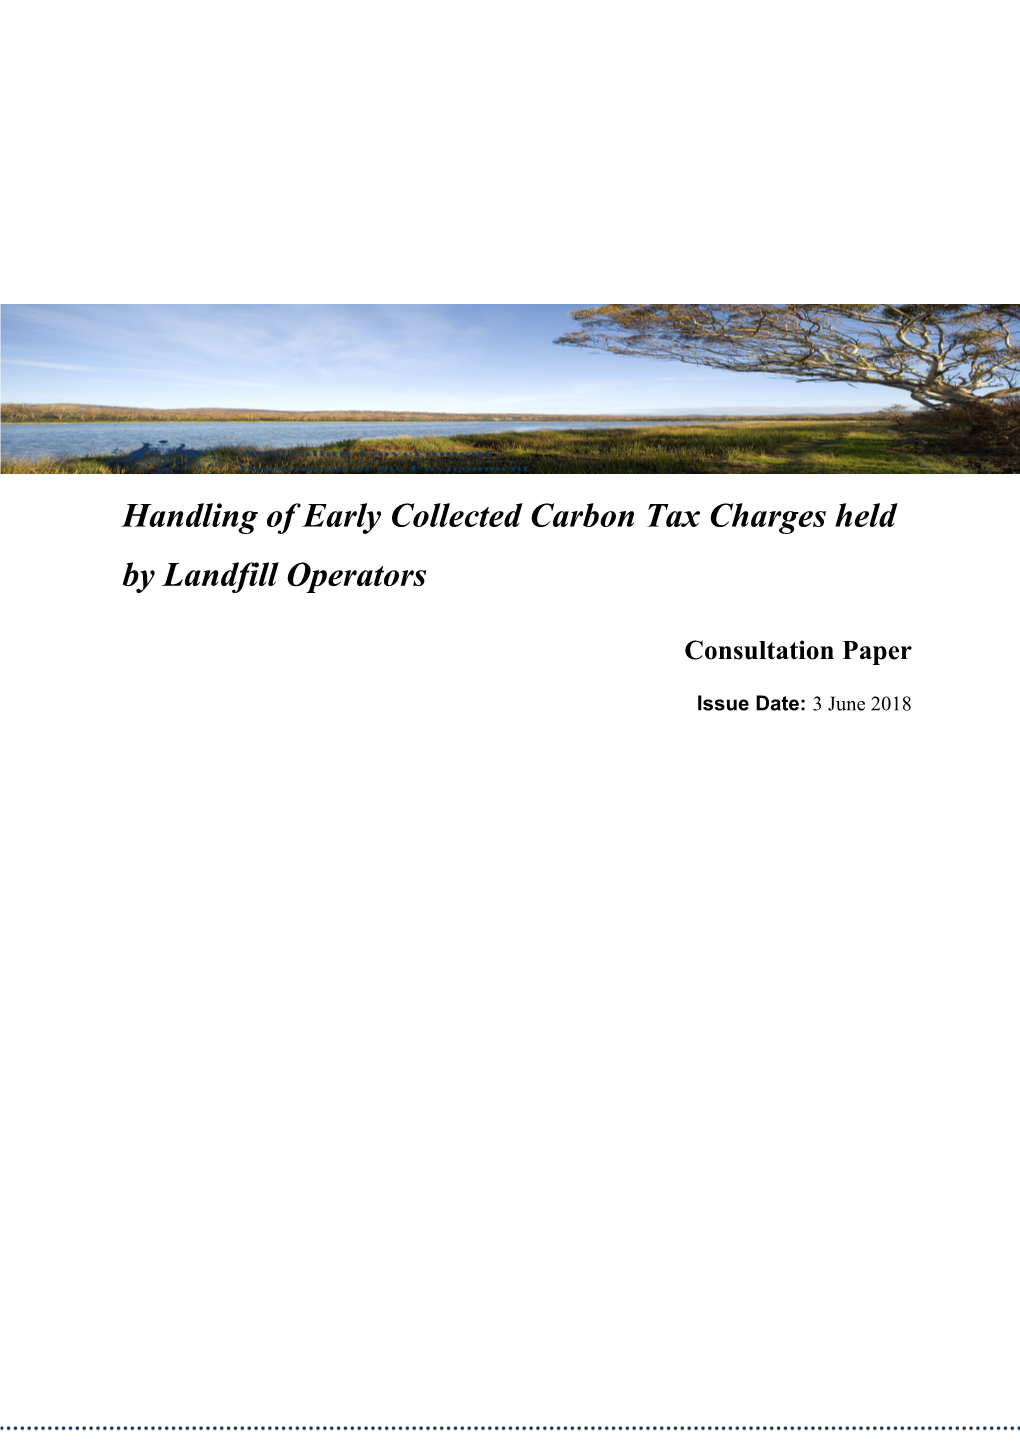 Handling of Early Collected Carbon Tax Charges Held by Landfill Operators: Consultation Paper